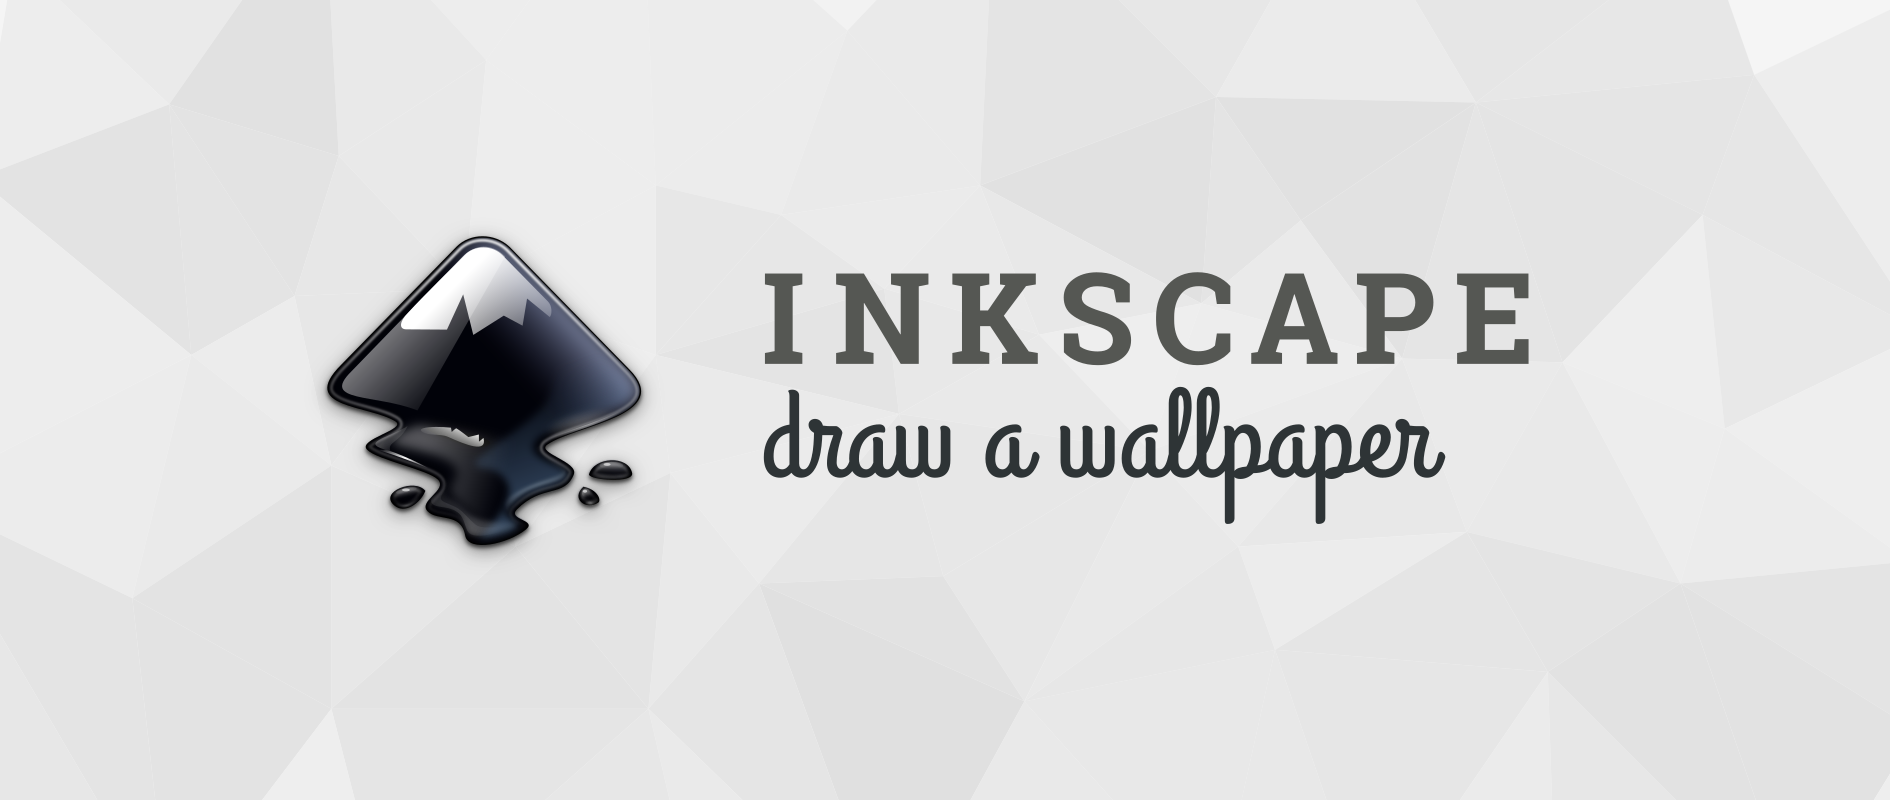 resize page to fit drawing inkscape